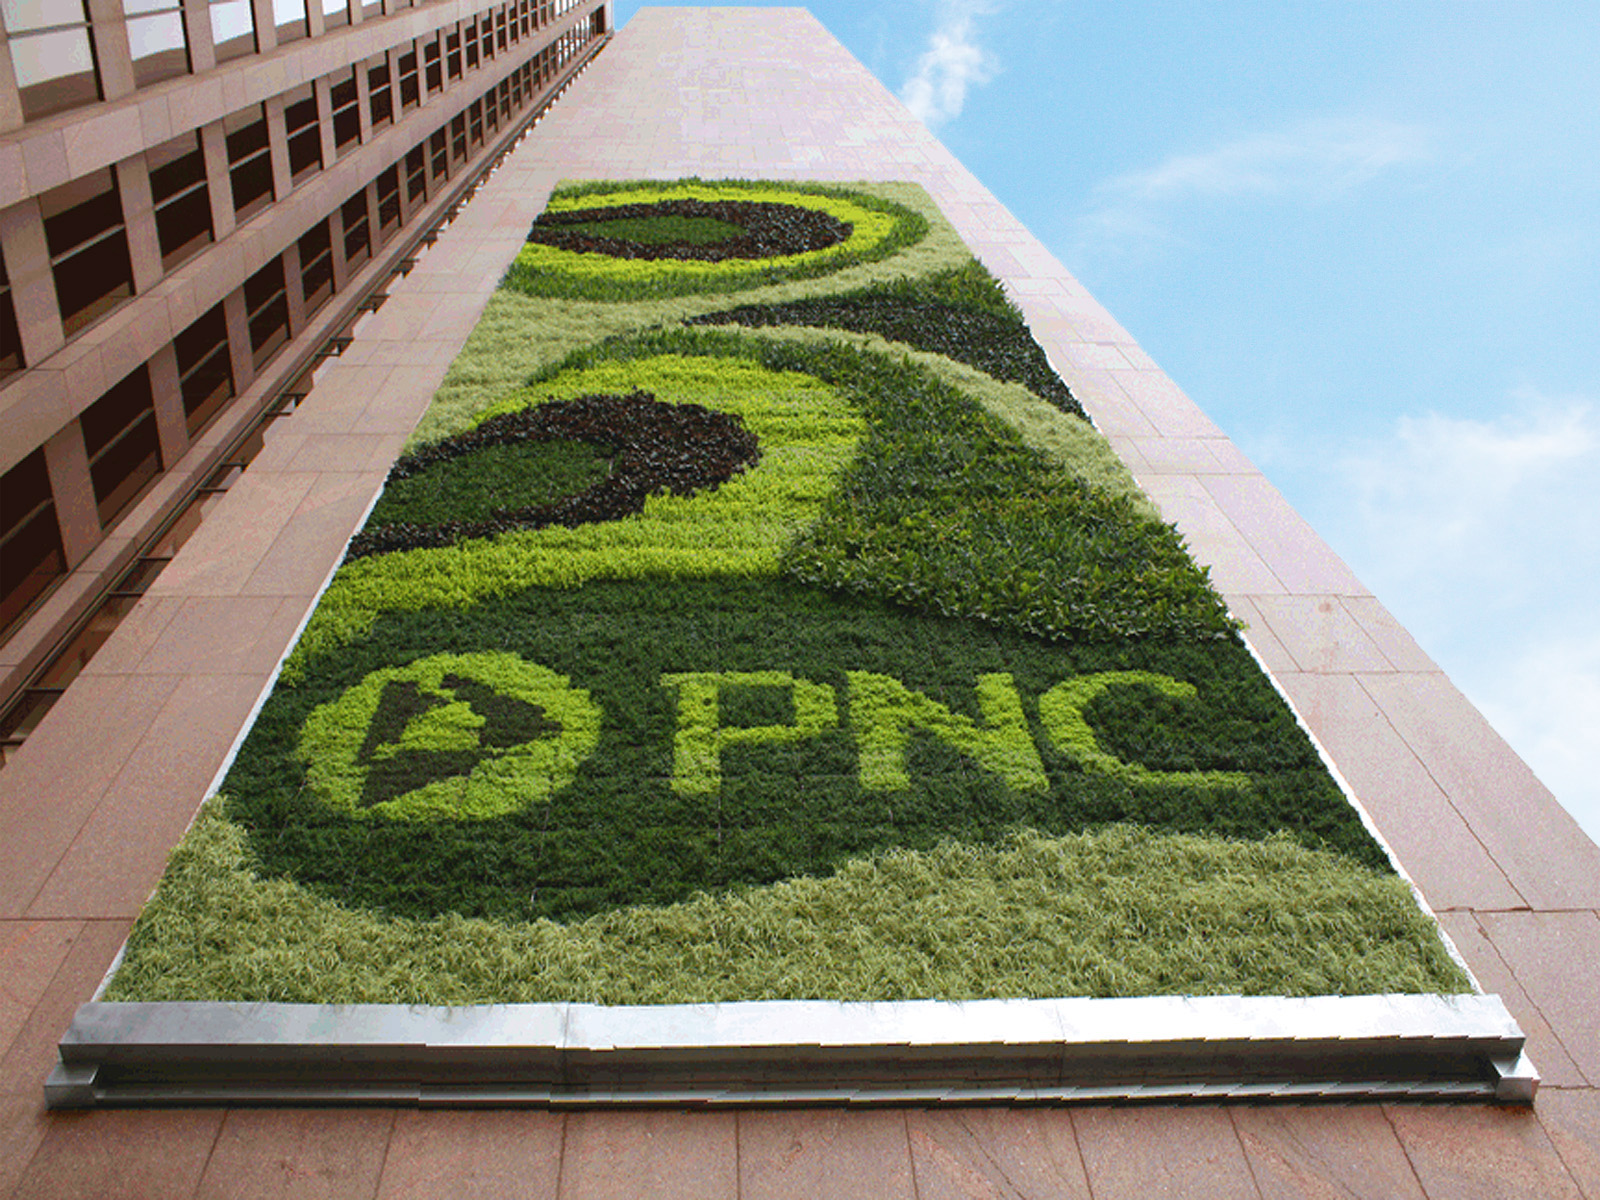 PNC Green Living Wall by Fisher ARCHitecture